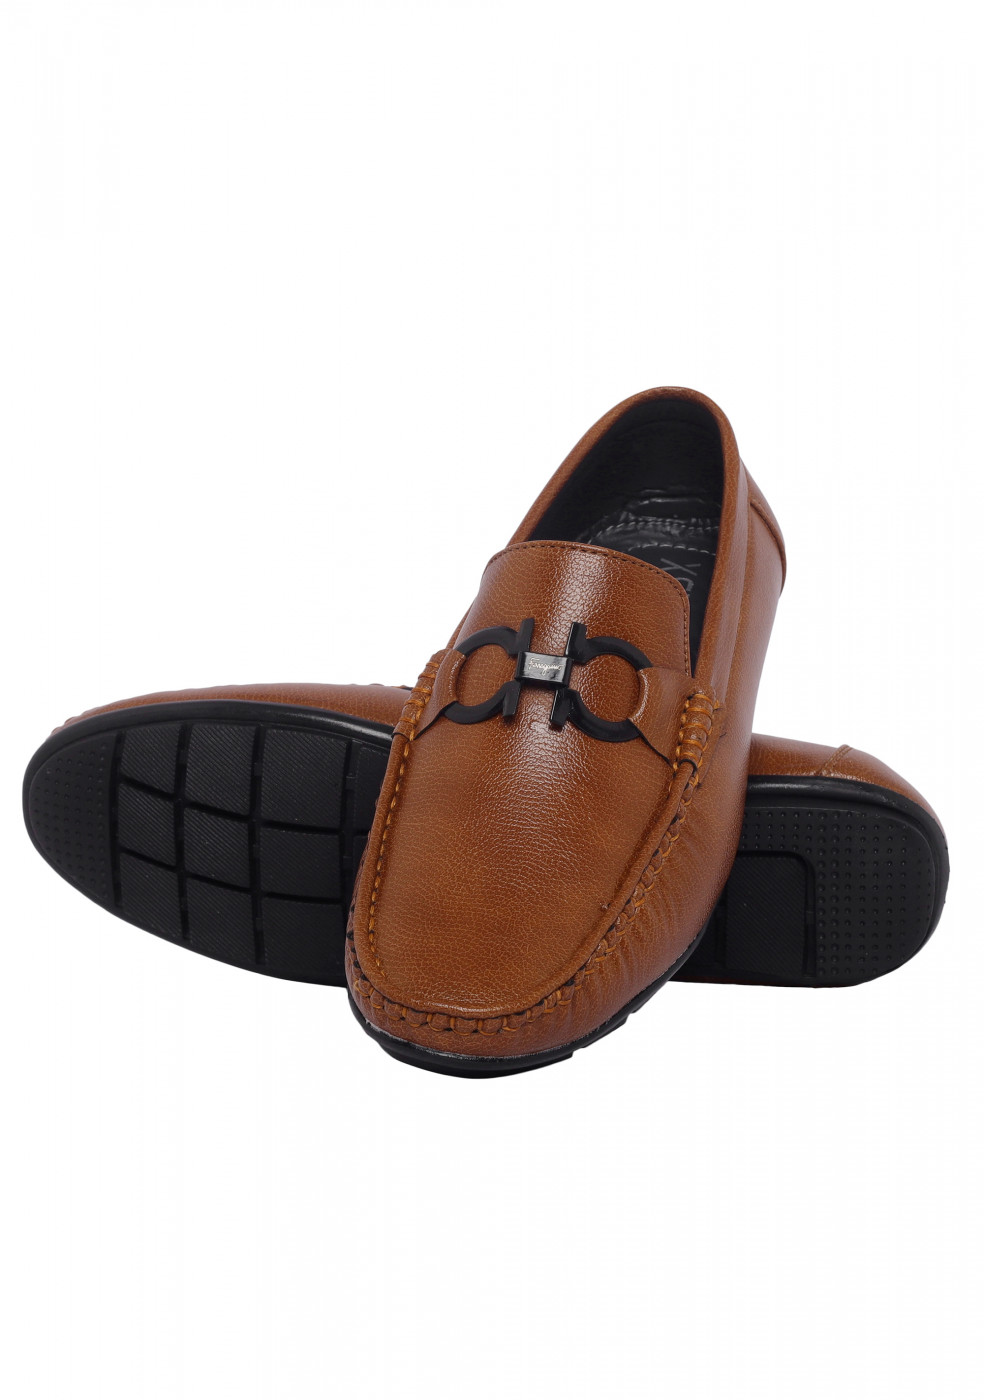 XSTOM TAN Color Loafers For Men